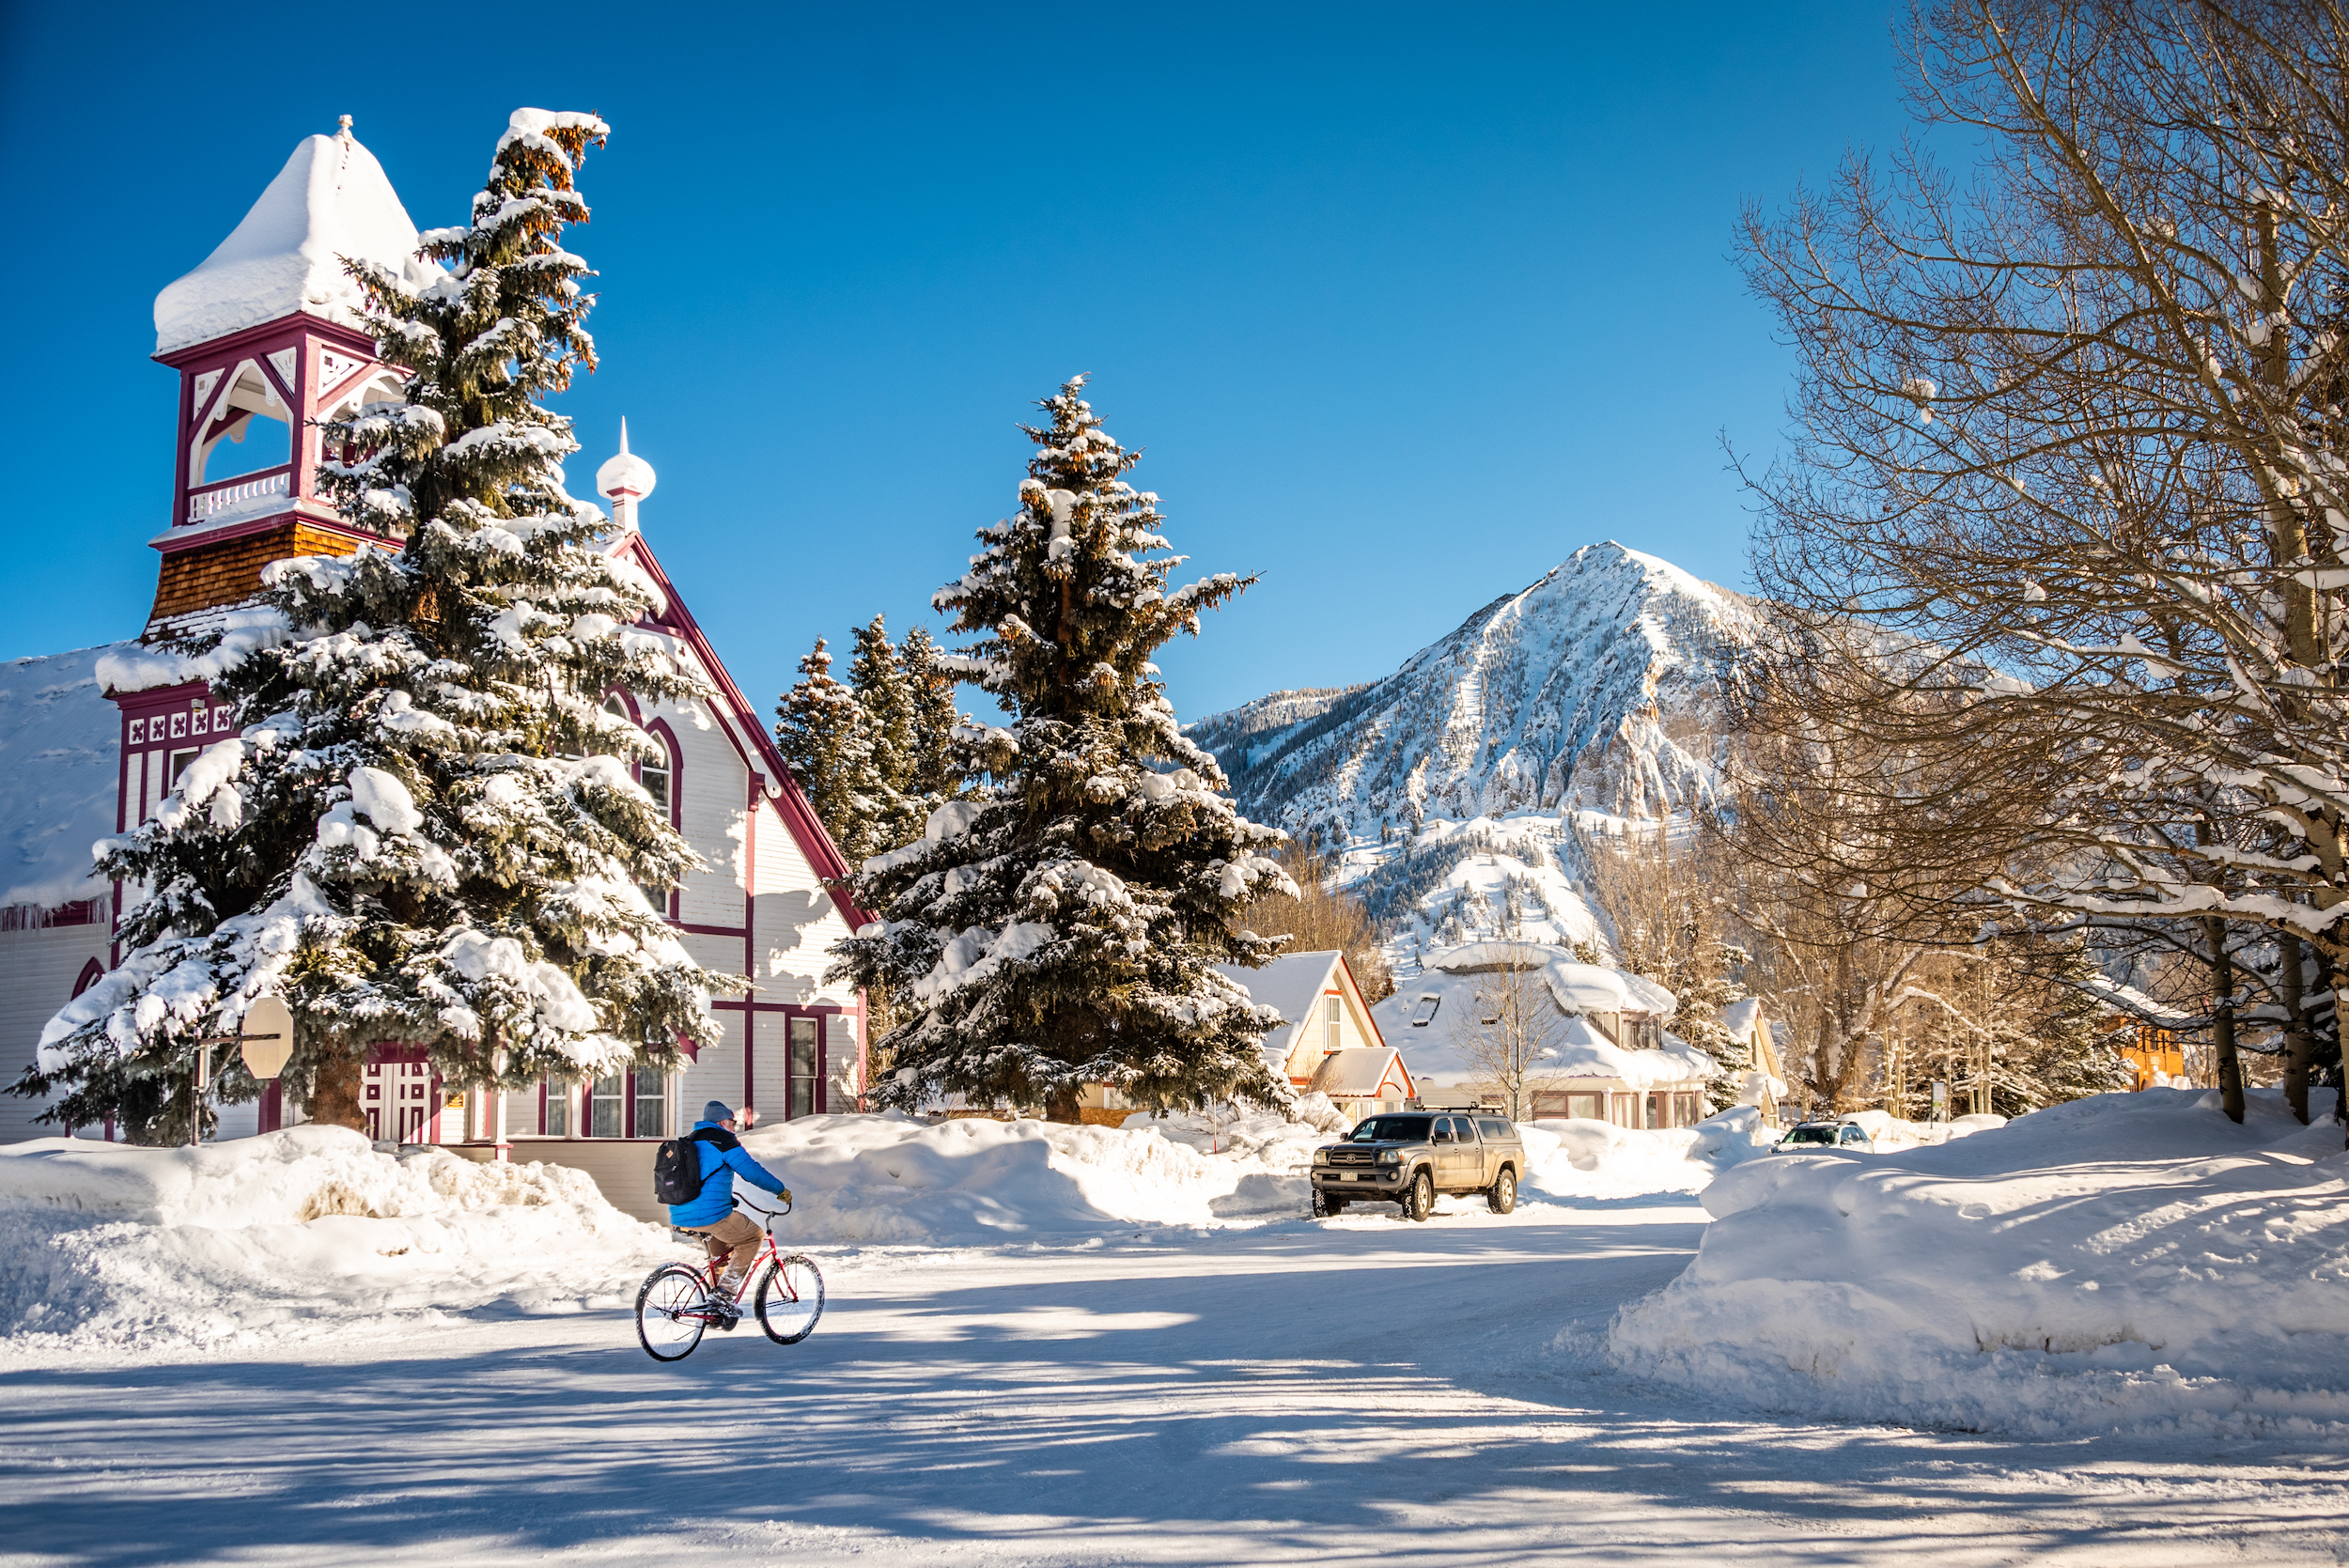 A person rides a bike down a snowy street. Crested Butte in winter is snowy and beautiful